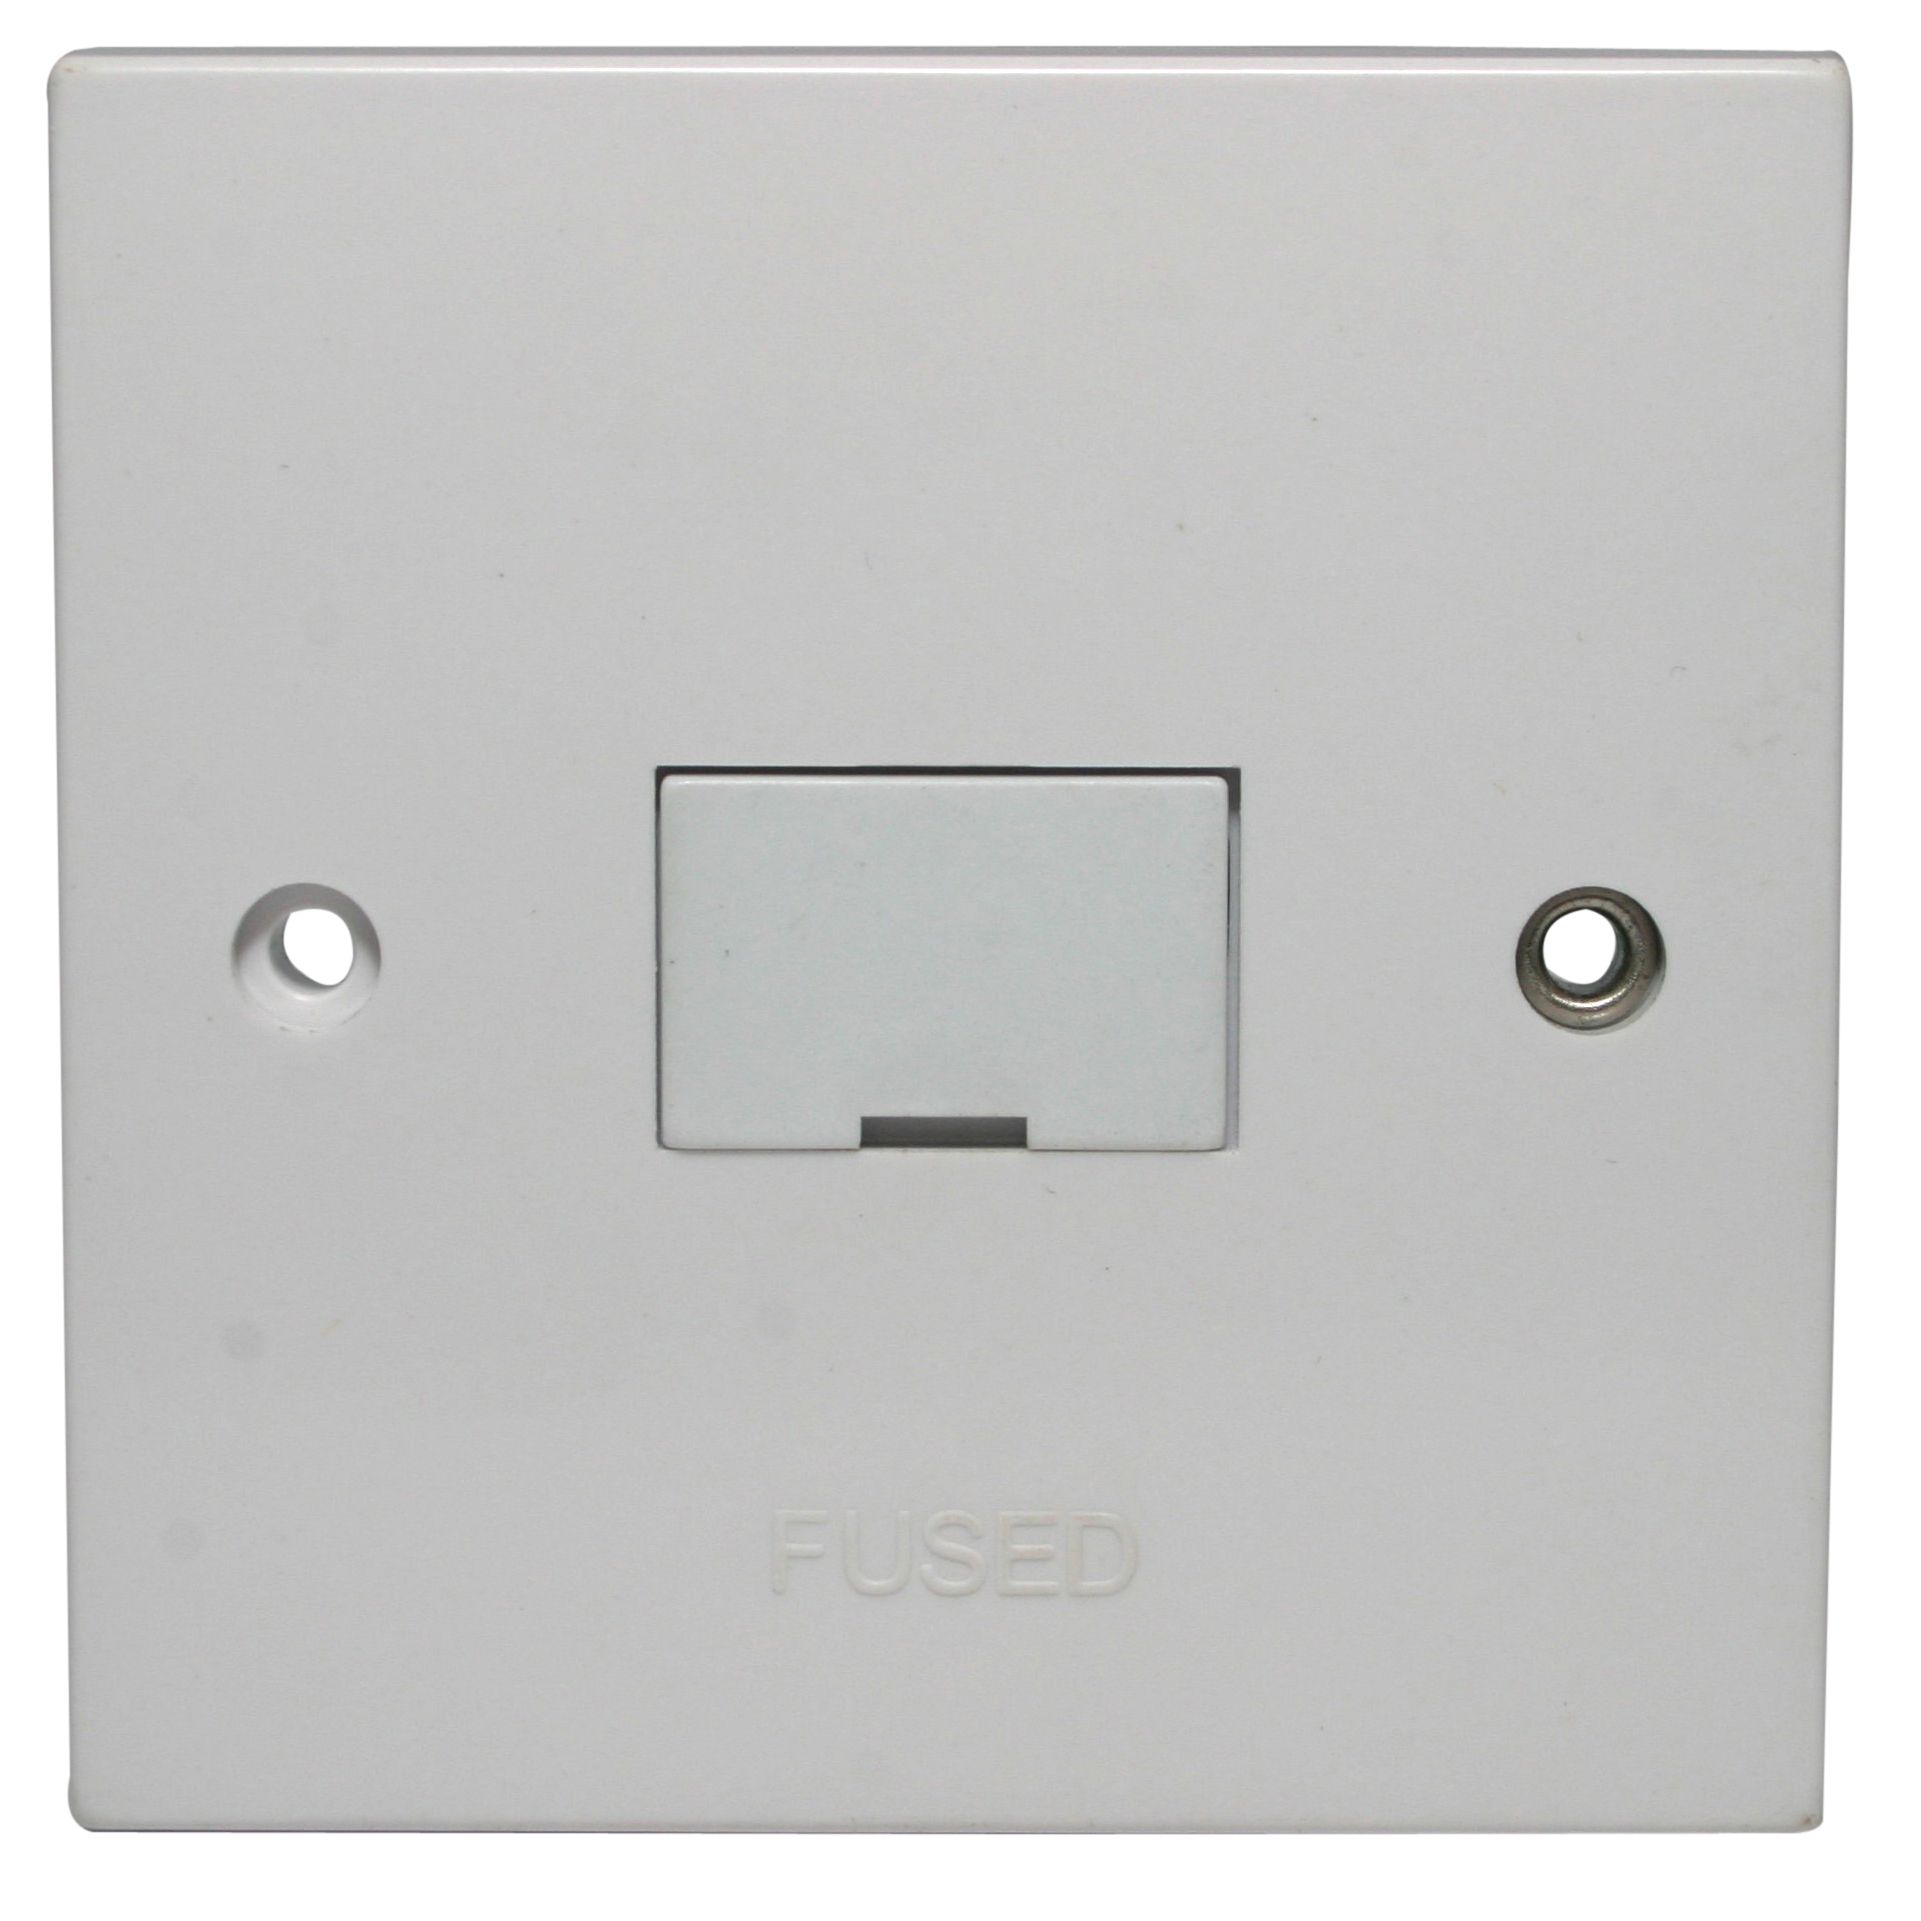 Pro Power 13A White Fused connection unit